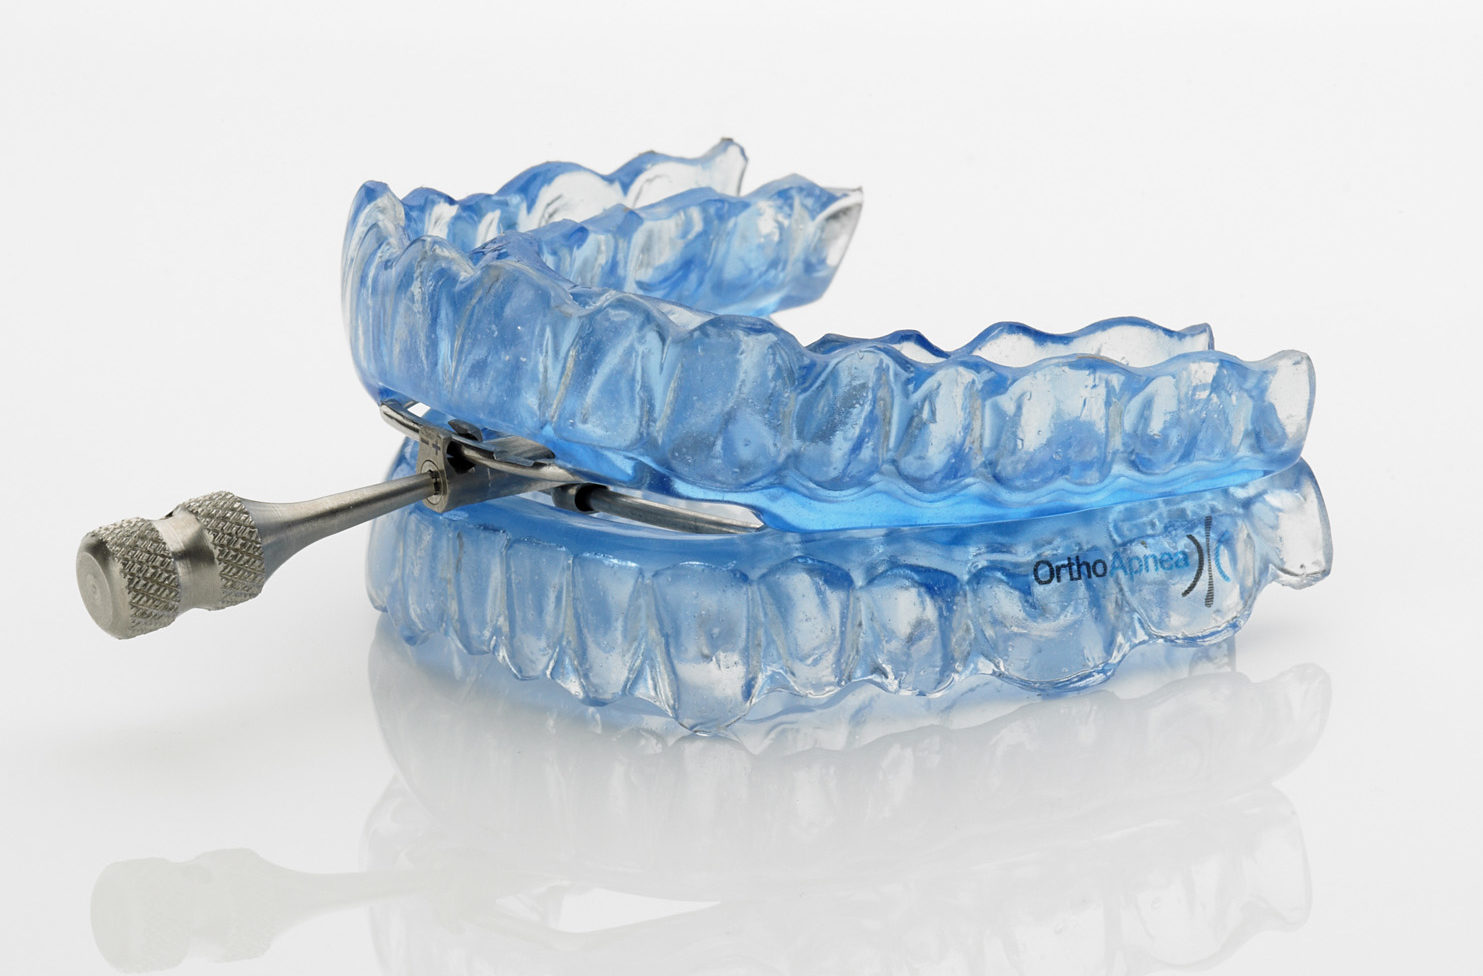 Snoring mouth guard in blue